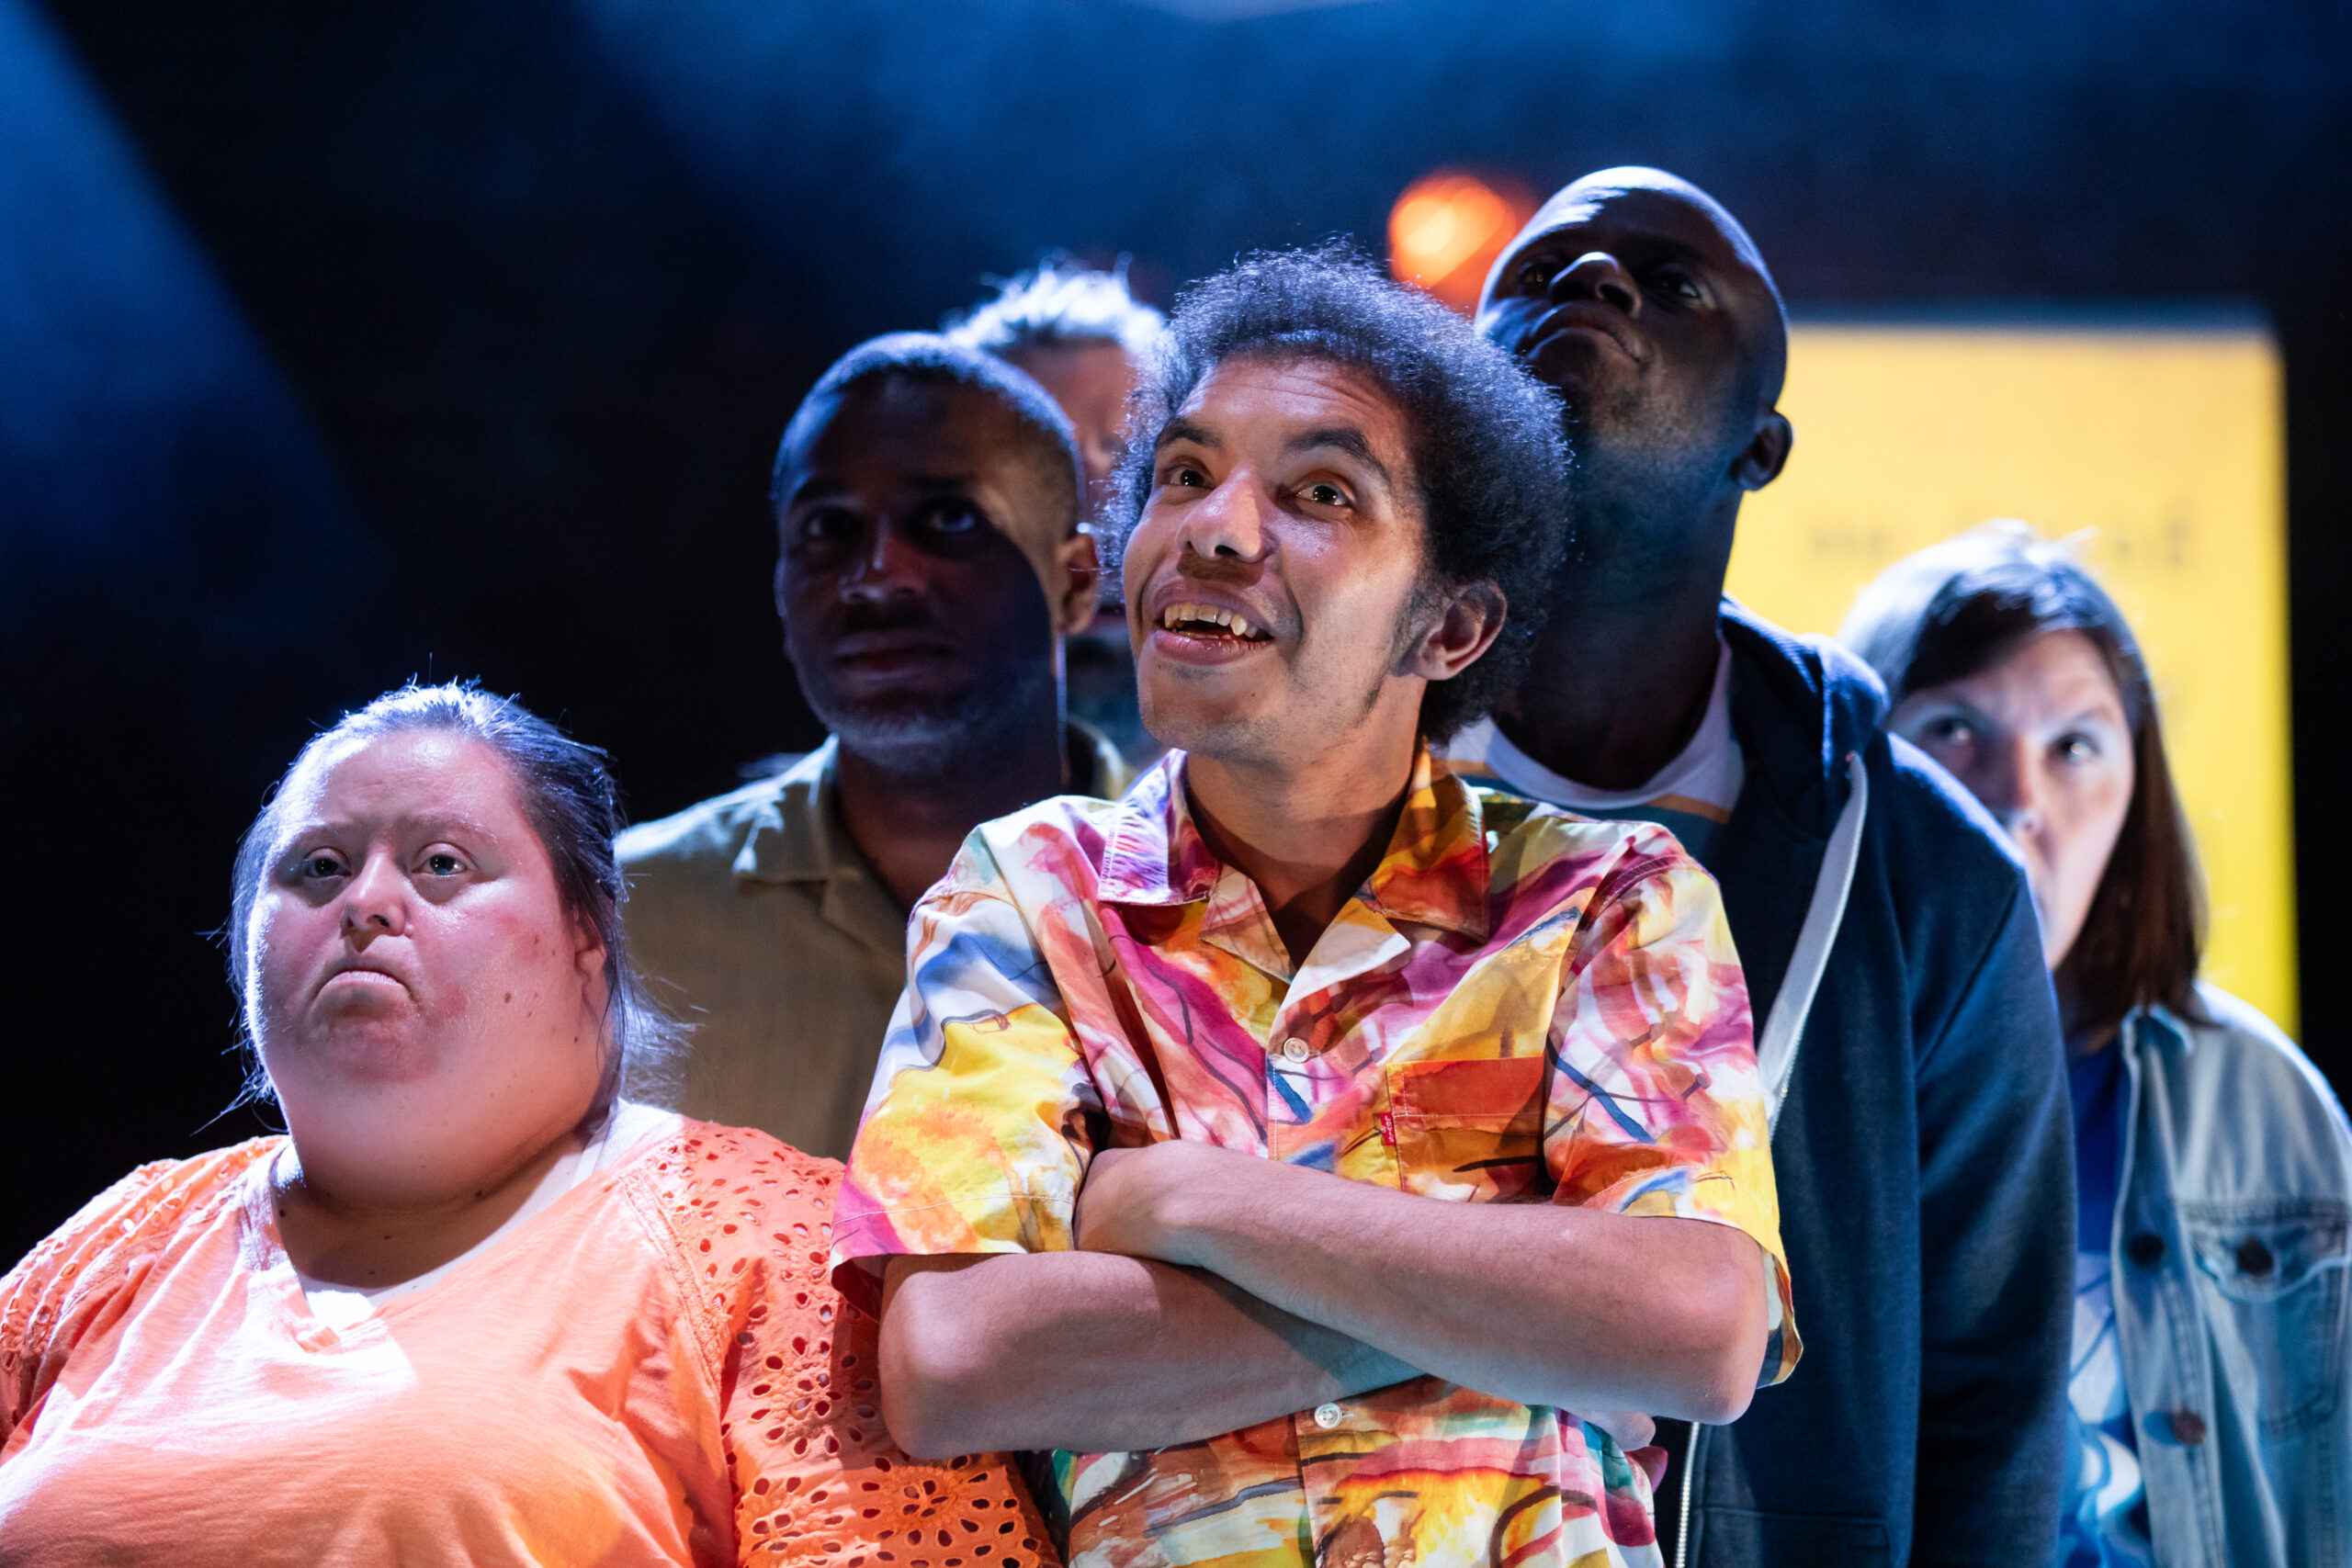 The company of Imposter 22 stands on stage in a pool of blue light. At the front are a black man with dark curly hair and a woman with Down syndrome with dark blond hair tied at the back. The man wears a colourful short-sleeved shirt and has his arm crossed on his chest; he smiles looking ahead with wide eyes. The woman is looking up with a pouting expression. She wears an orange shirt. Behind them stand two black men looking up.